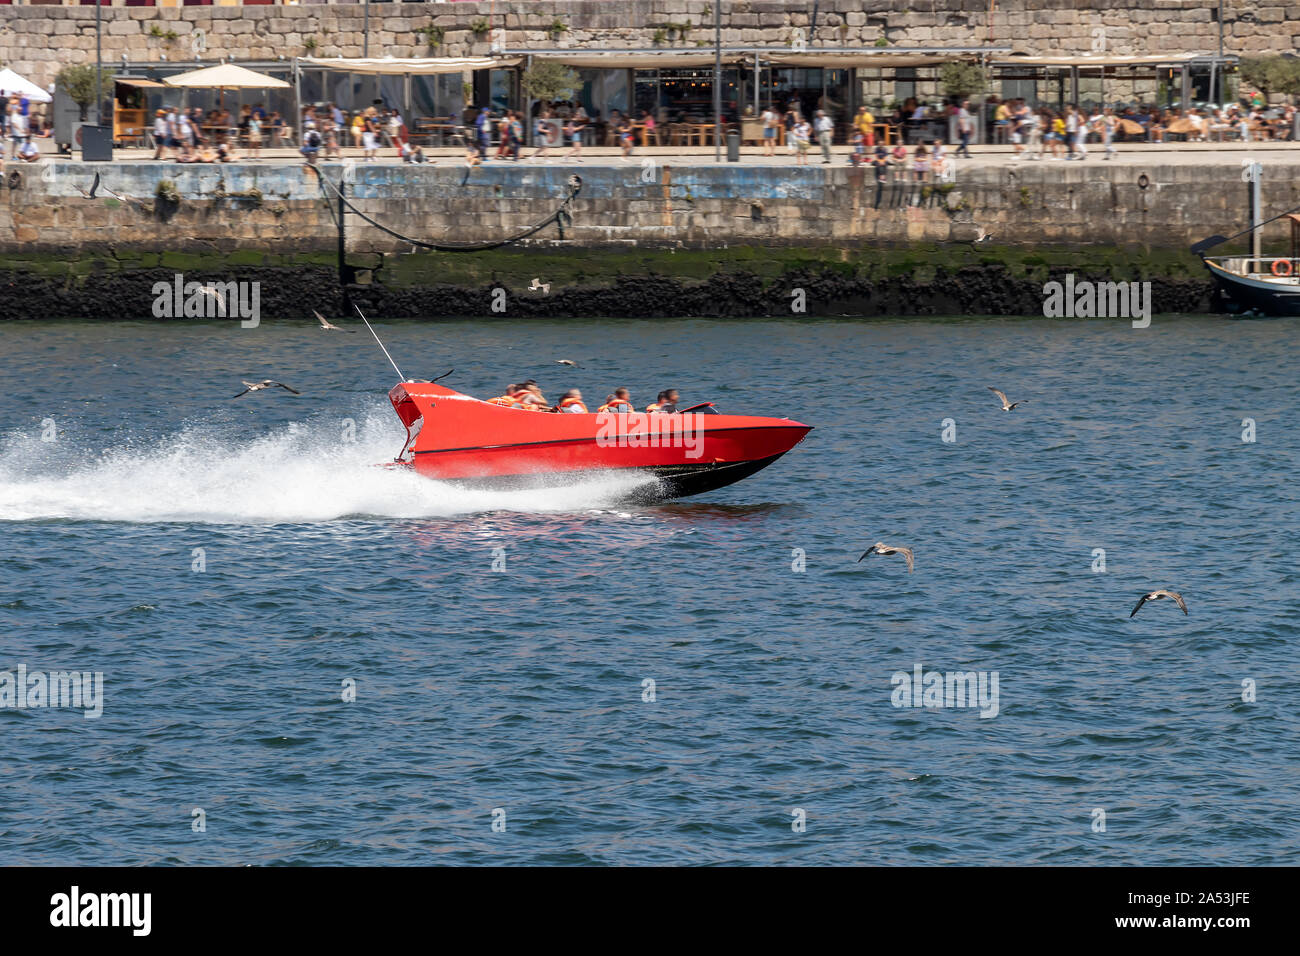 Jet Boat in Porto, Portugal. High speed red boat over Douro river Stock Photo